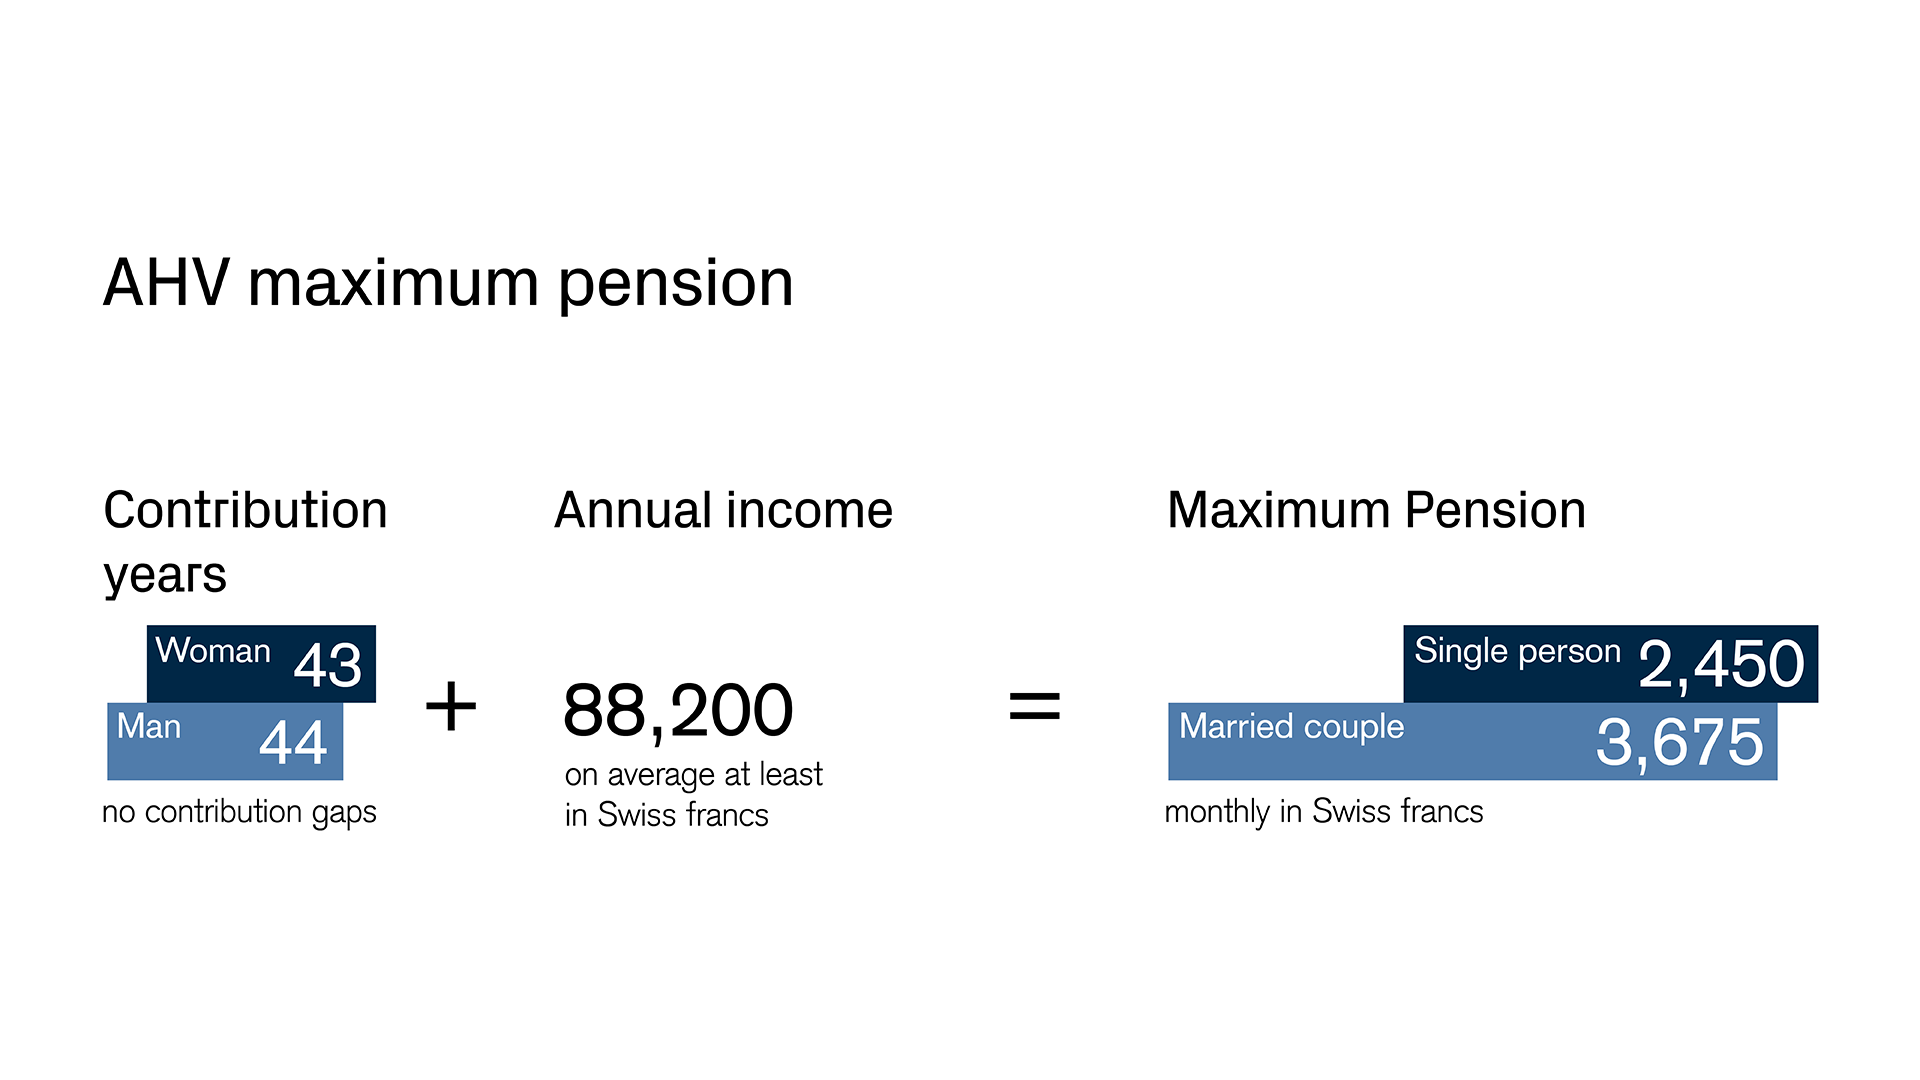 Requirements for the maximum AHV pension